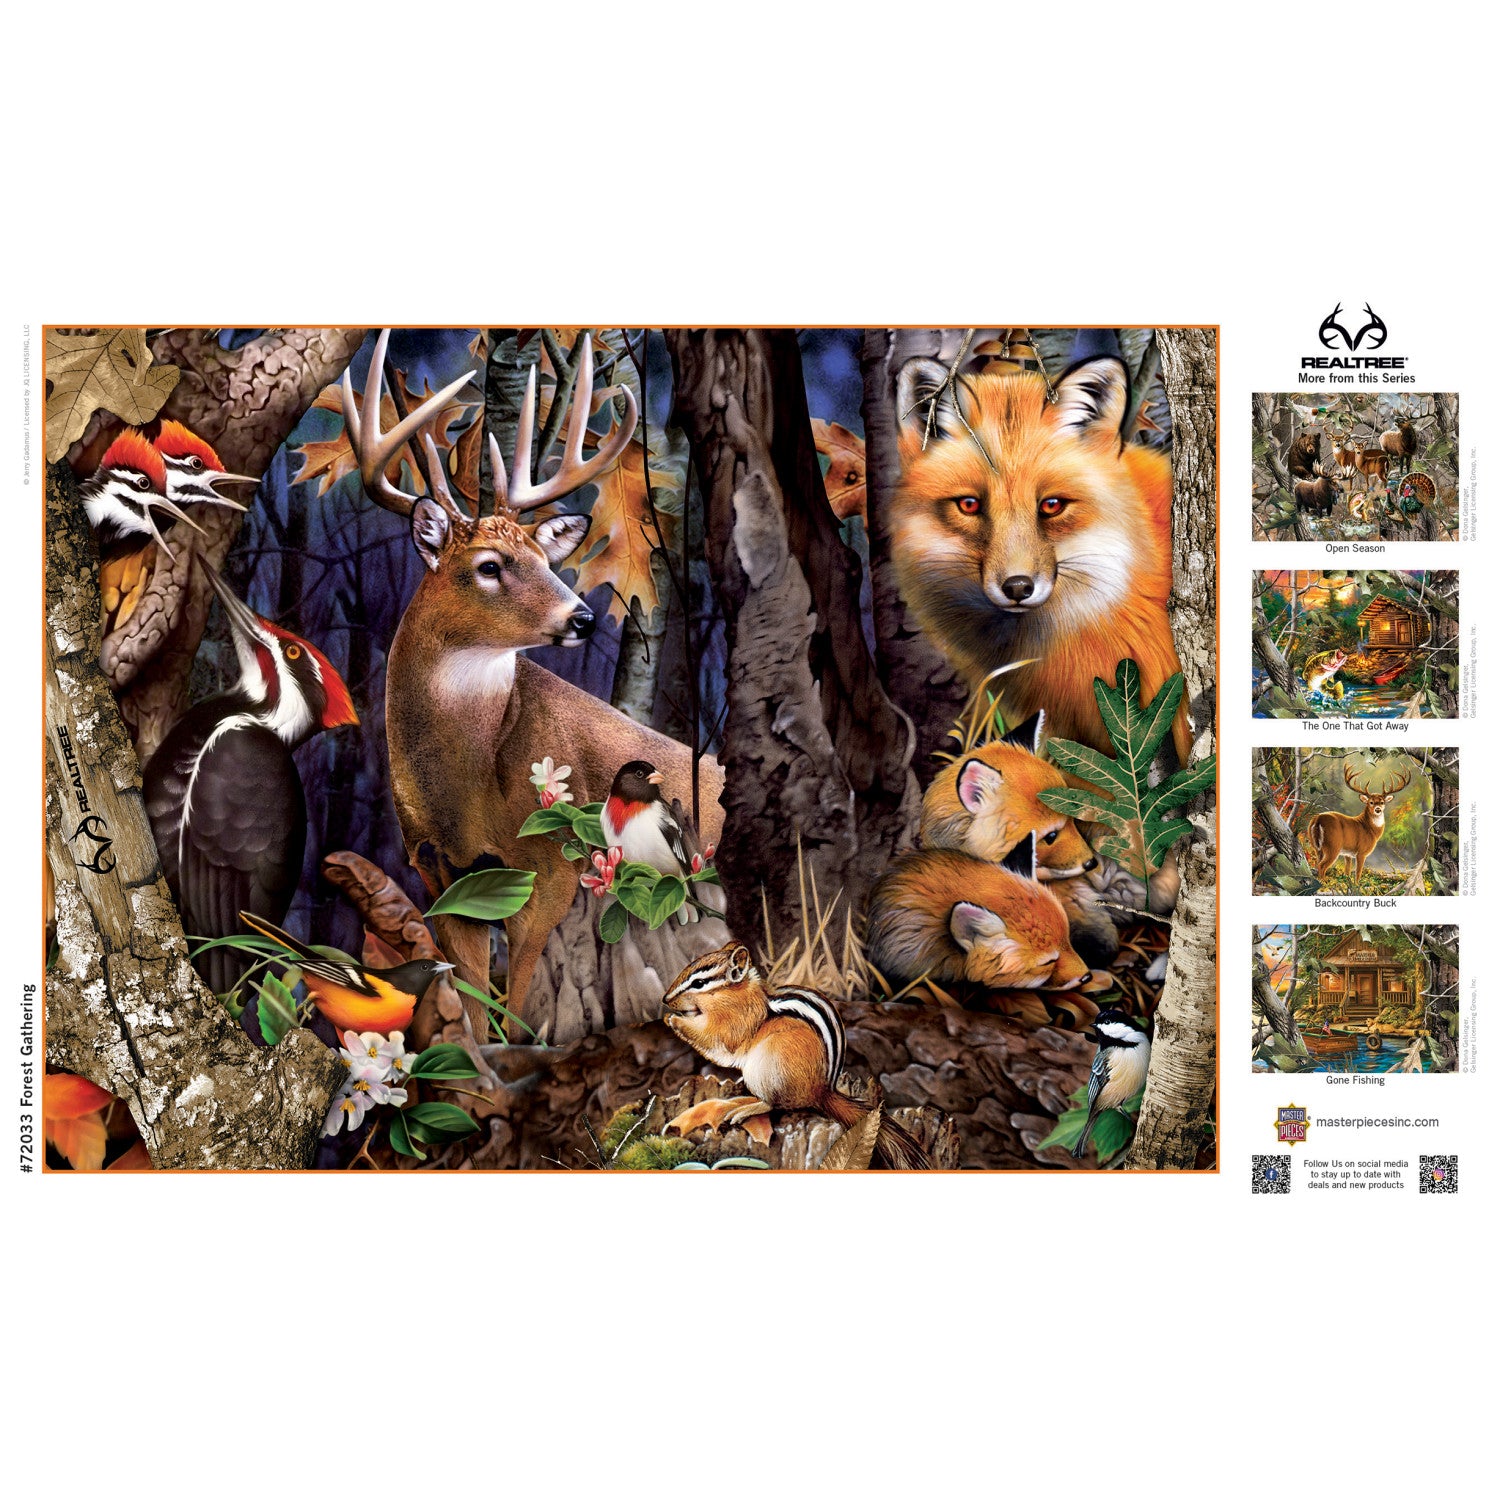 Realtree - Forest Gathering 1000 Piece Puzzle